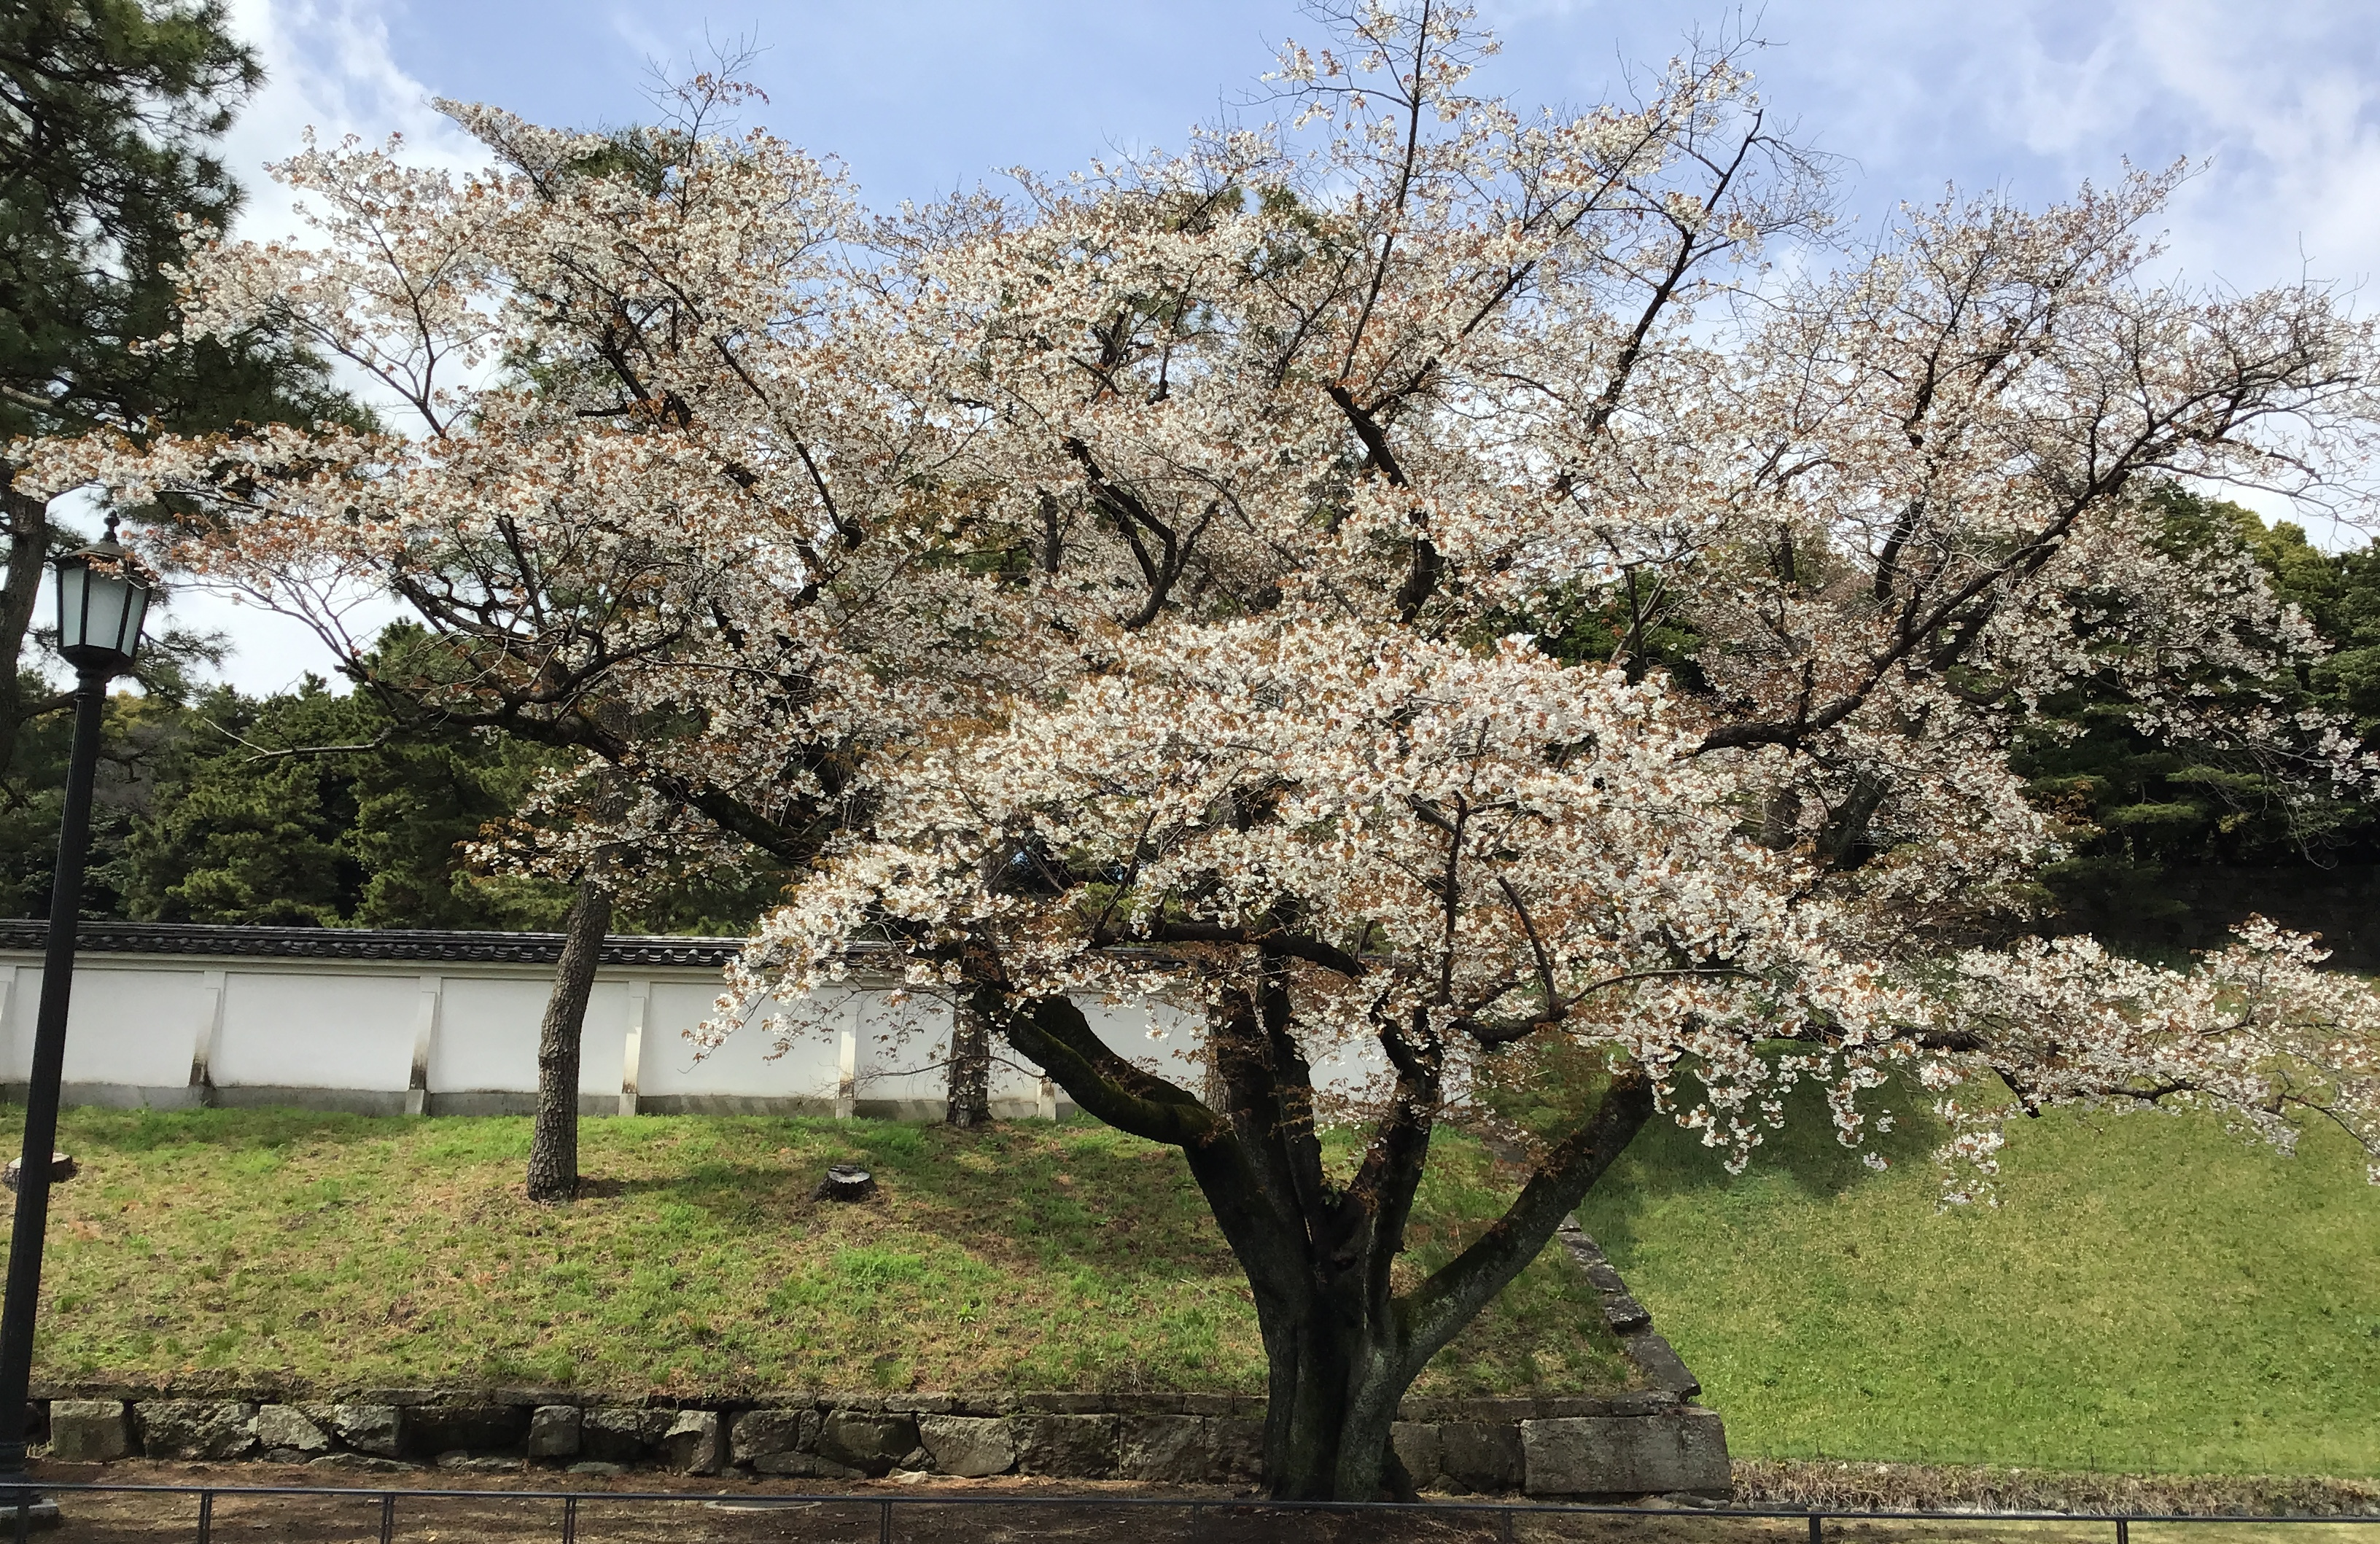 A cherry blossom tree with white blossoms